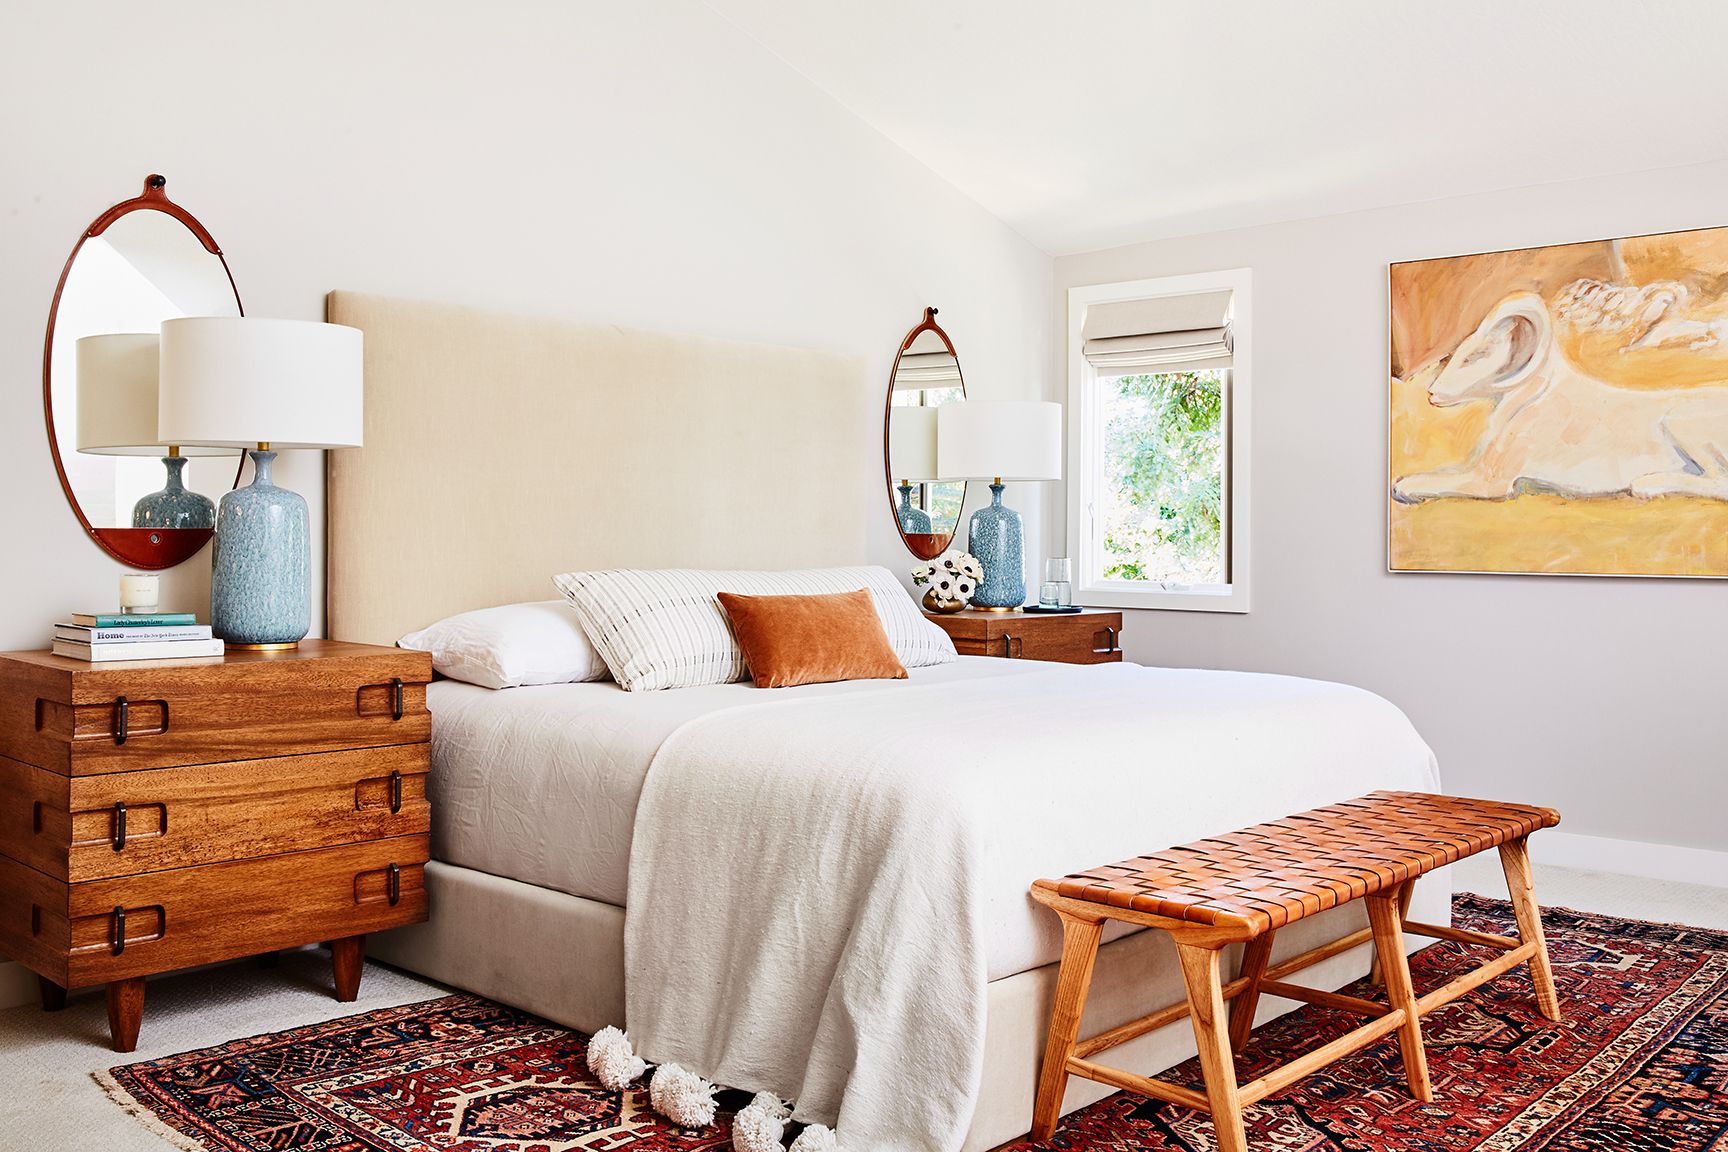 7 Feng Shui Bedroom Design Ideas to Try This Weekend